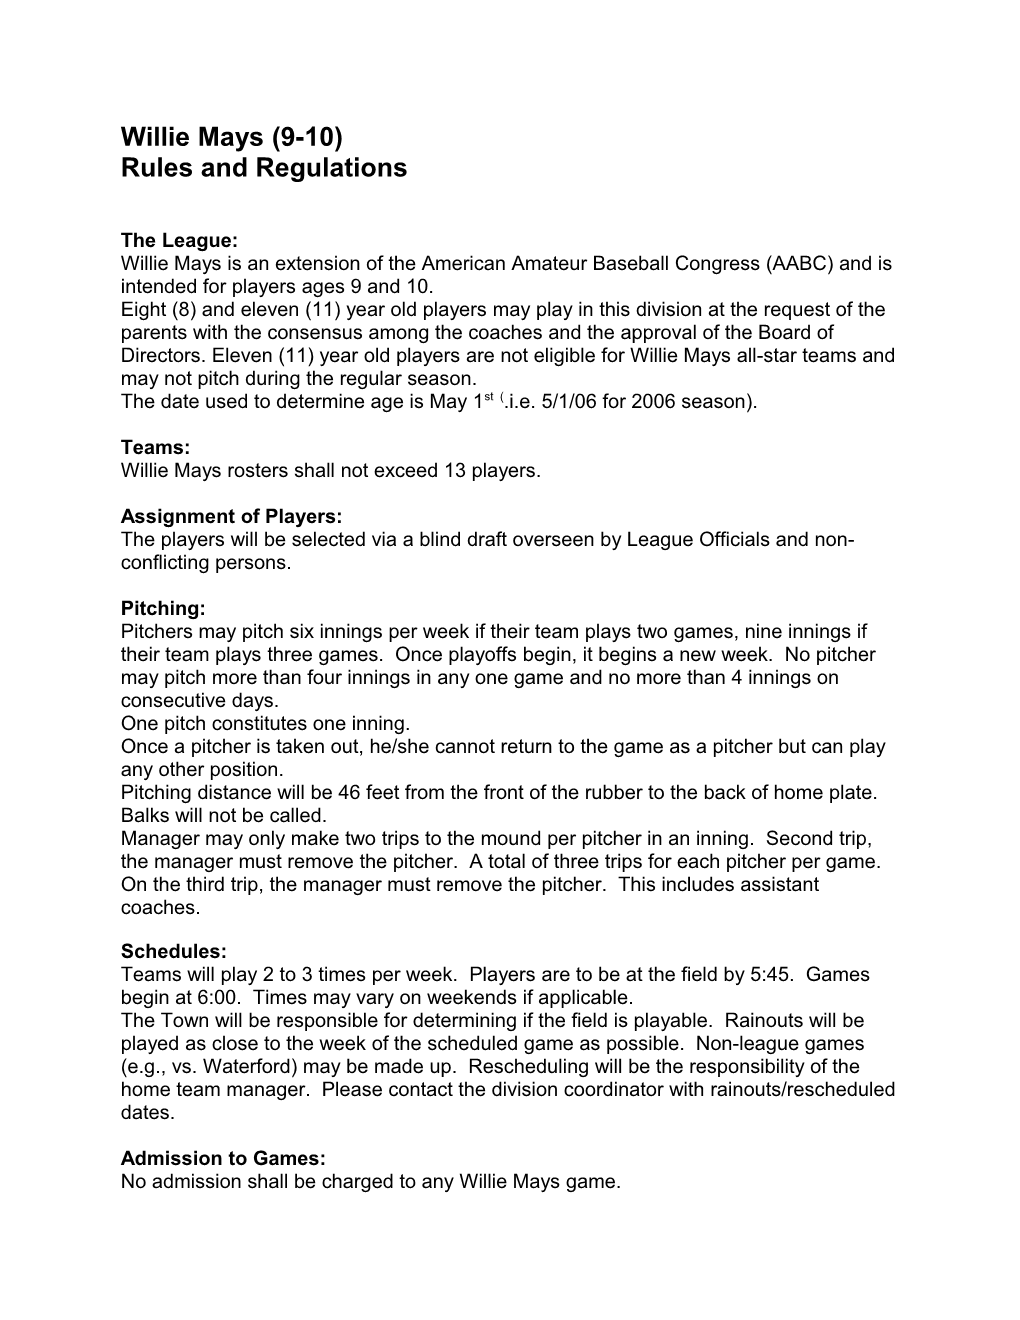 Willie Mays (9-10) Rules and Regulations